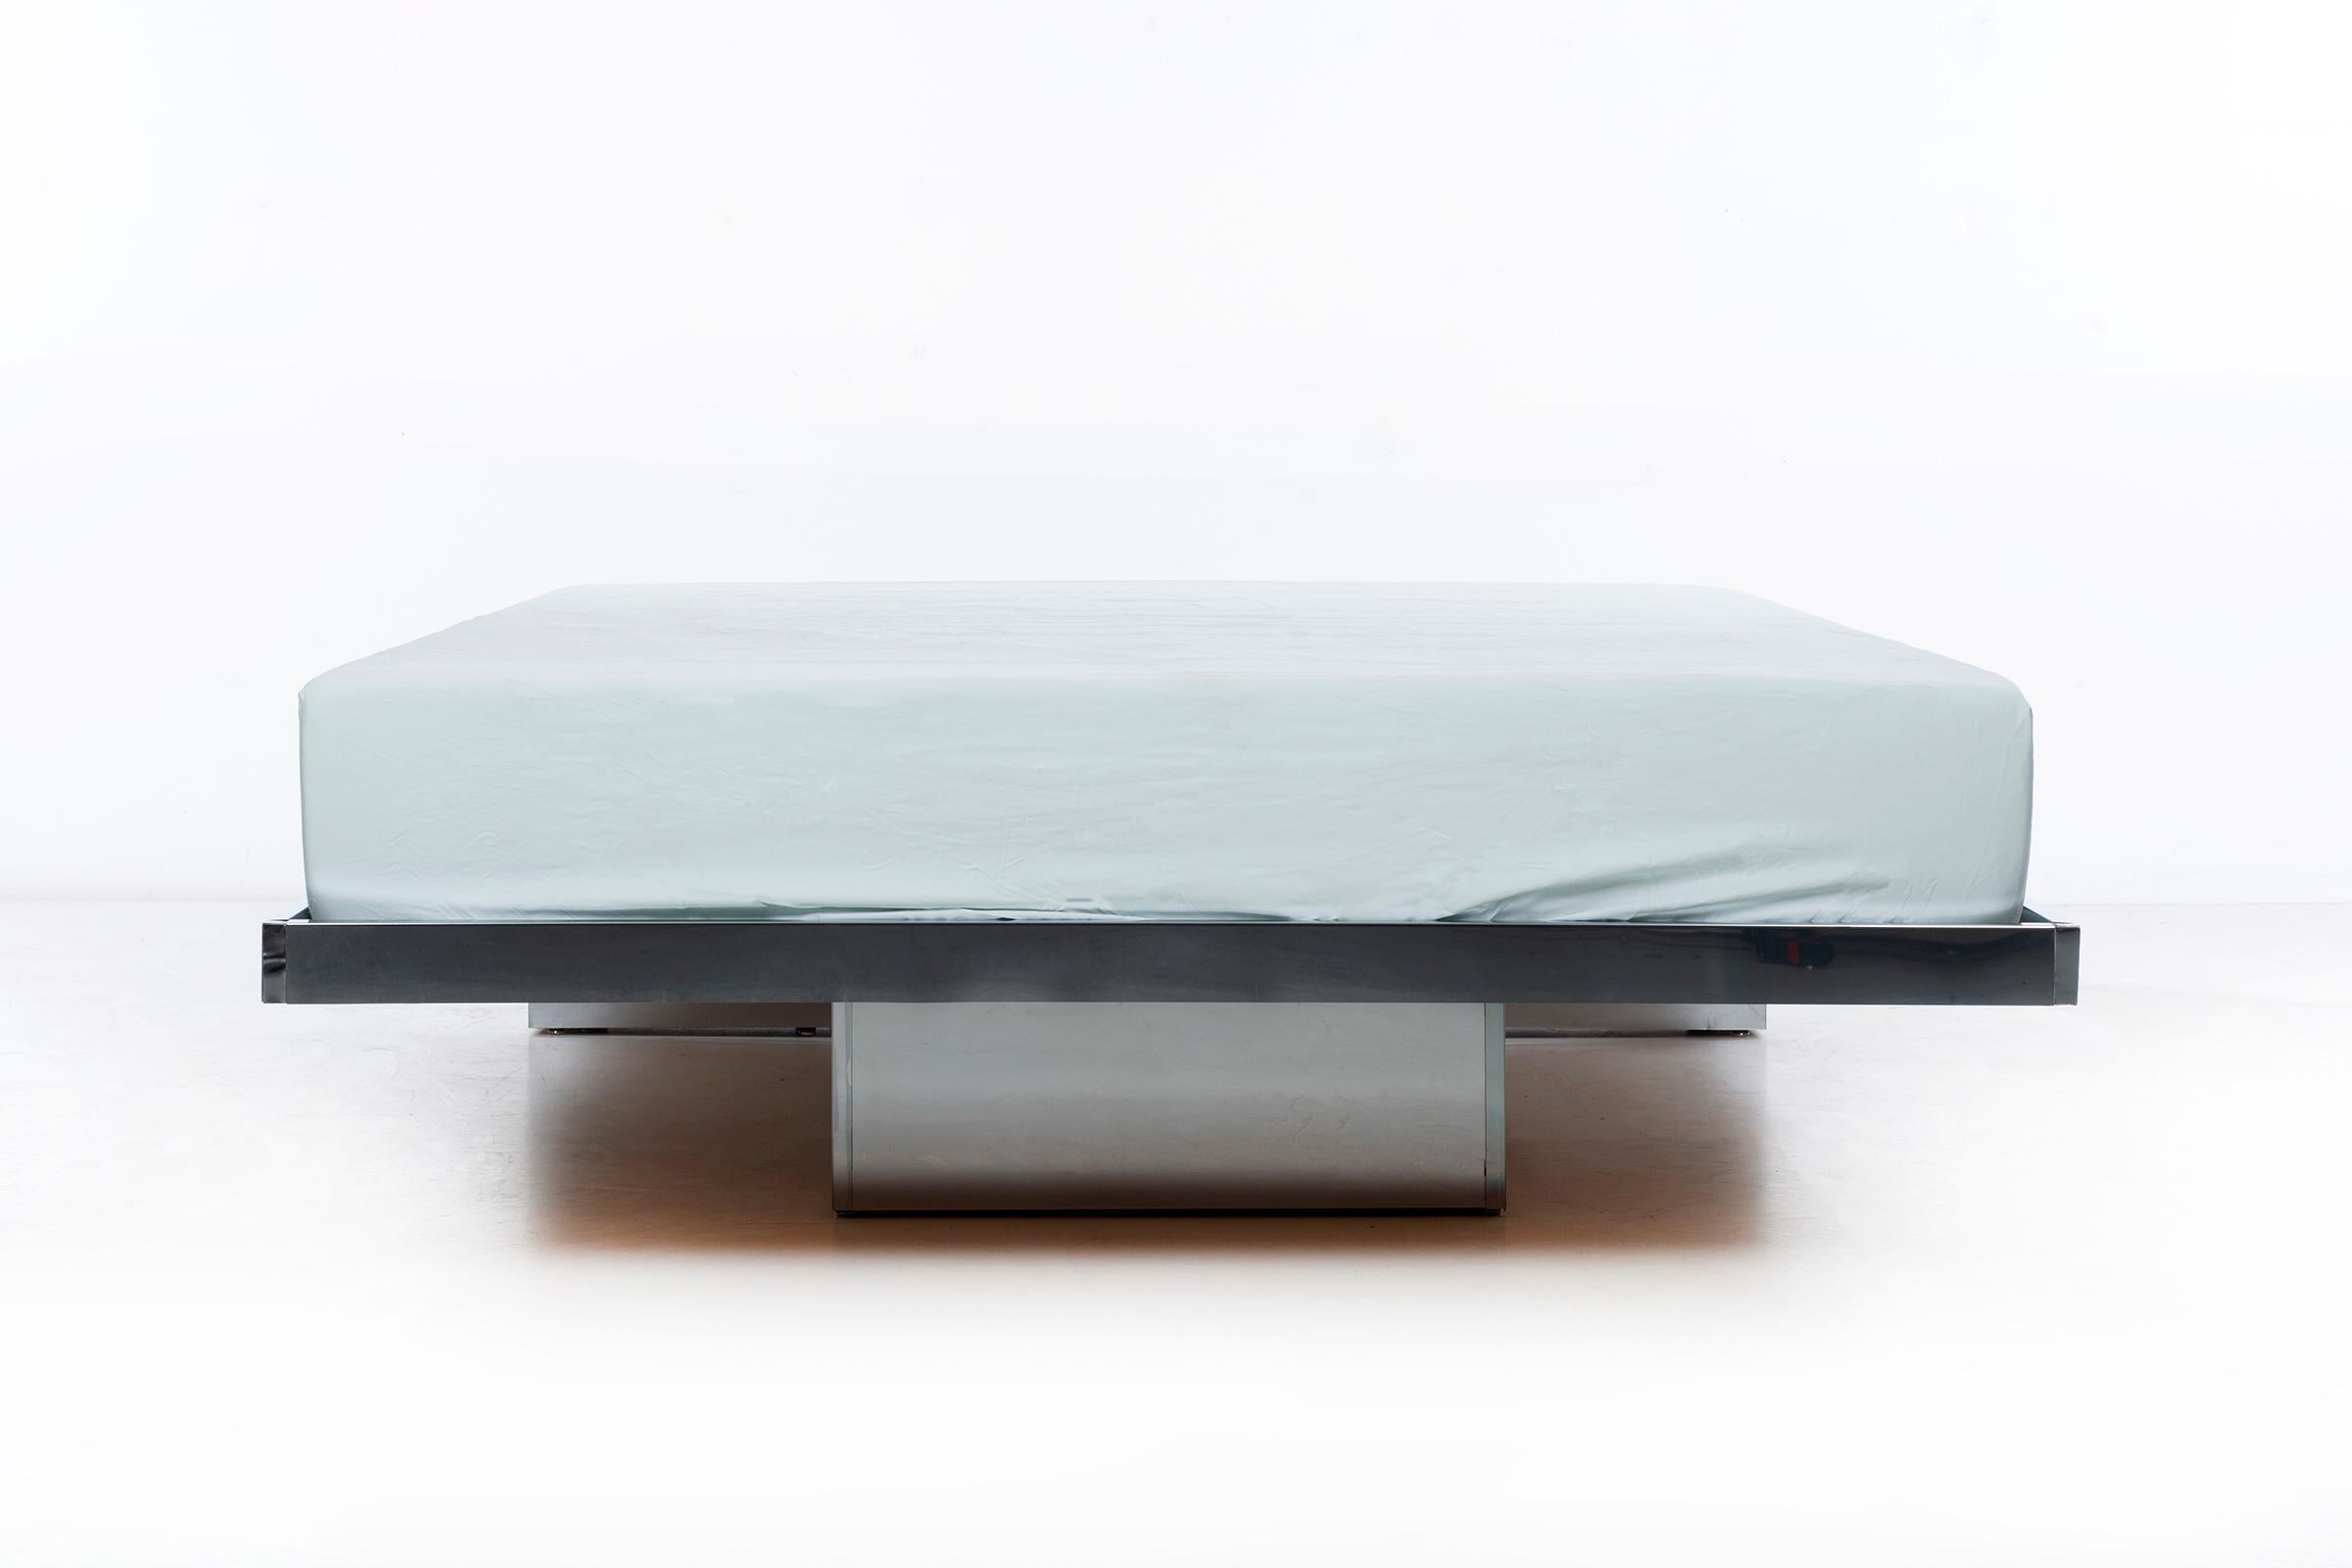 Ello Minimalist design Queen-size platform bed;
Features lighted underside for enhanced ambiance, chrome plated steel finished.
Measures: 14.25